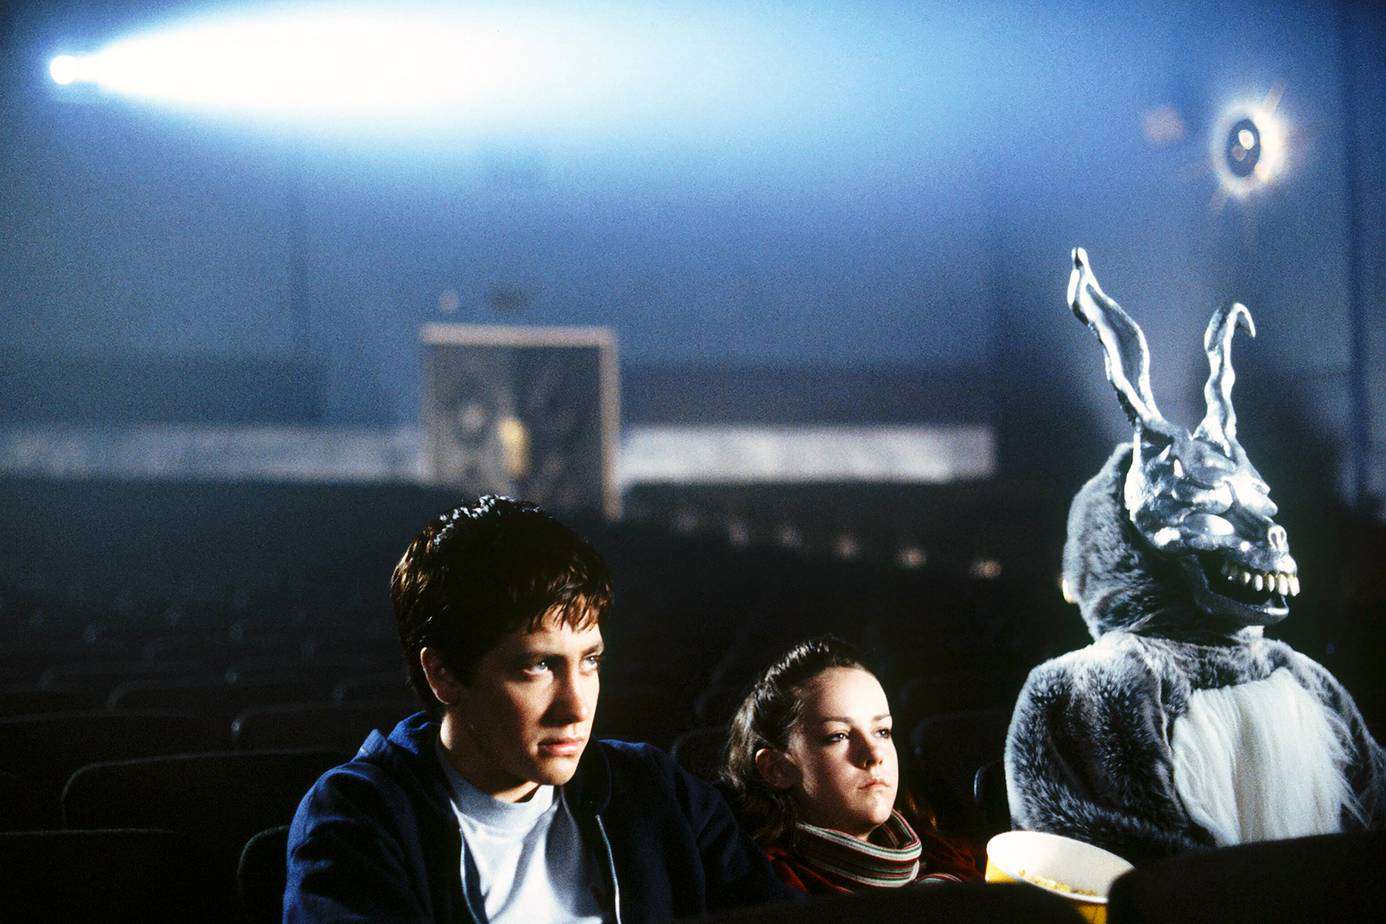 Donnie Darko, Gretchen and Frank at the movies